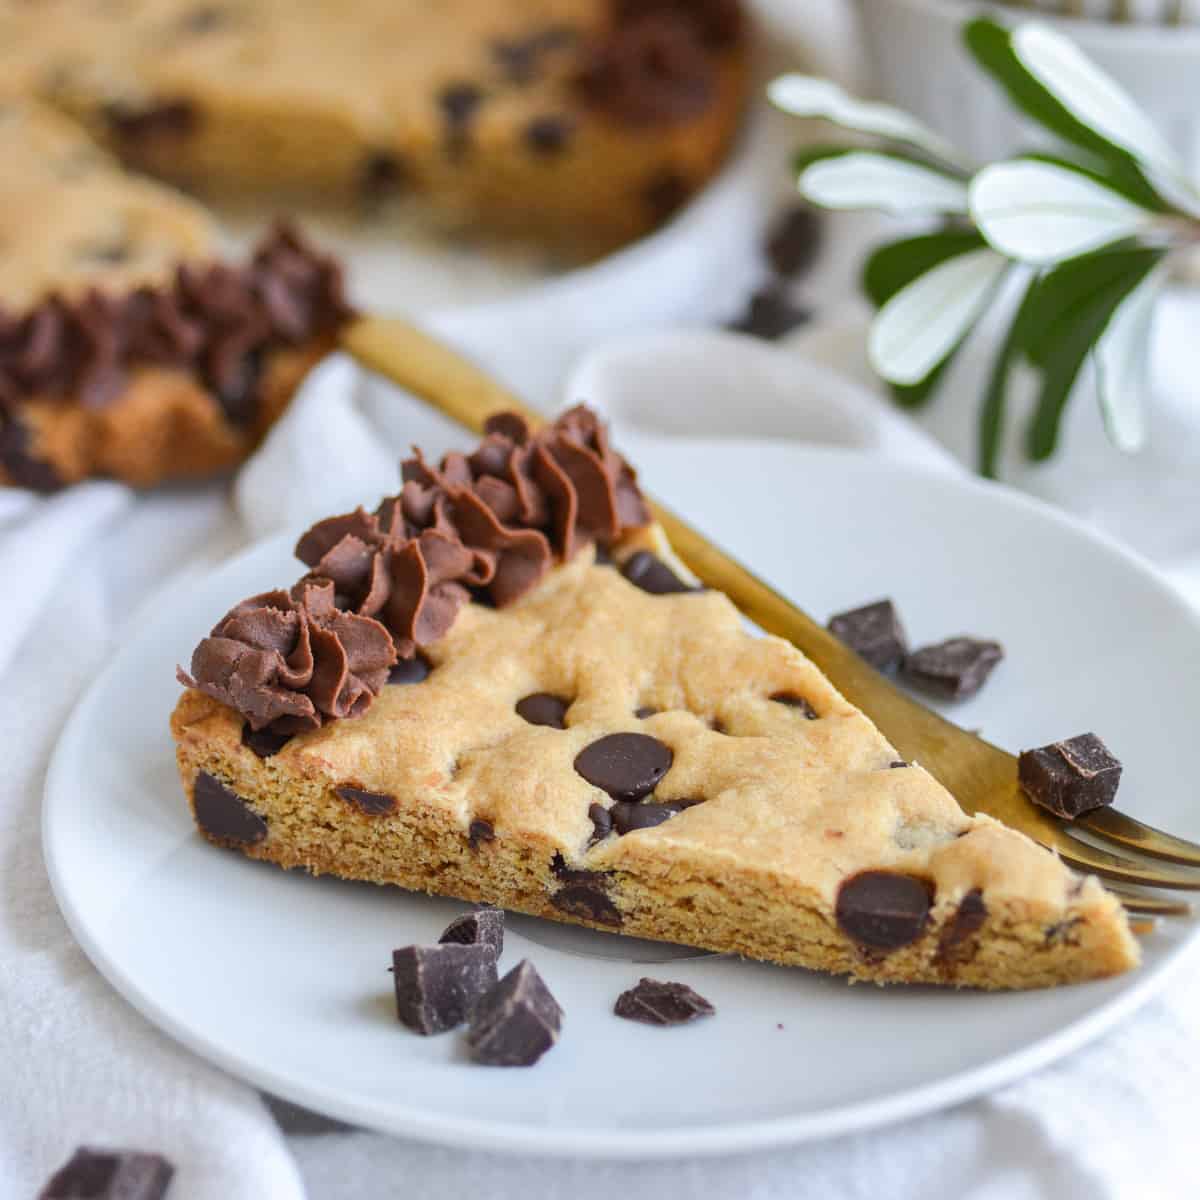 https://earthly-provisions.com/wp-content/uploads/2022/04/Vegan-Cookie-Cake-8.jpg